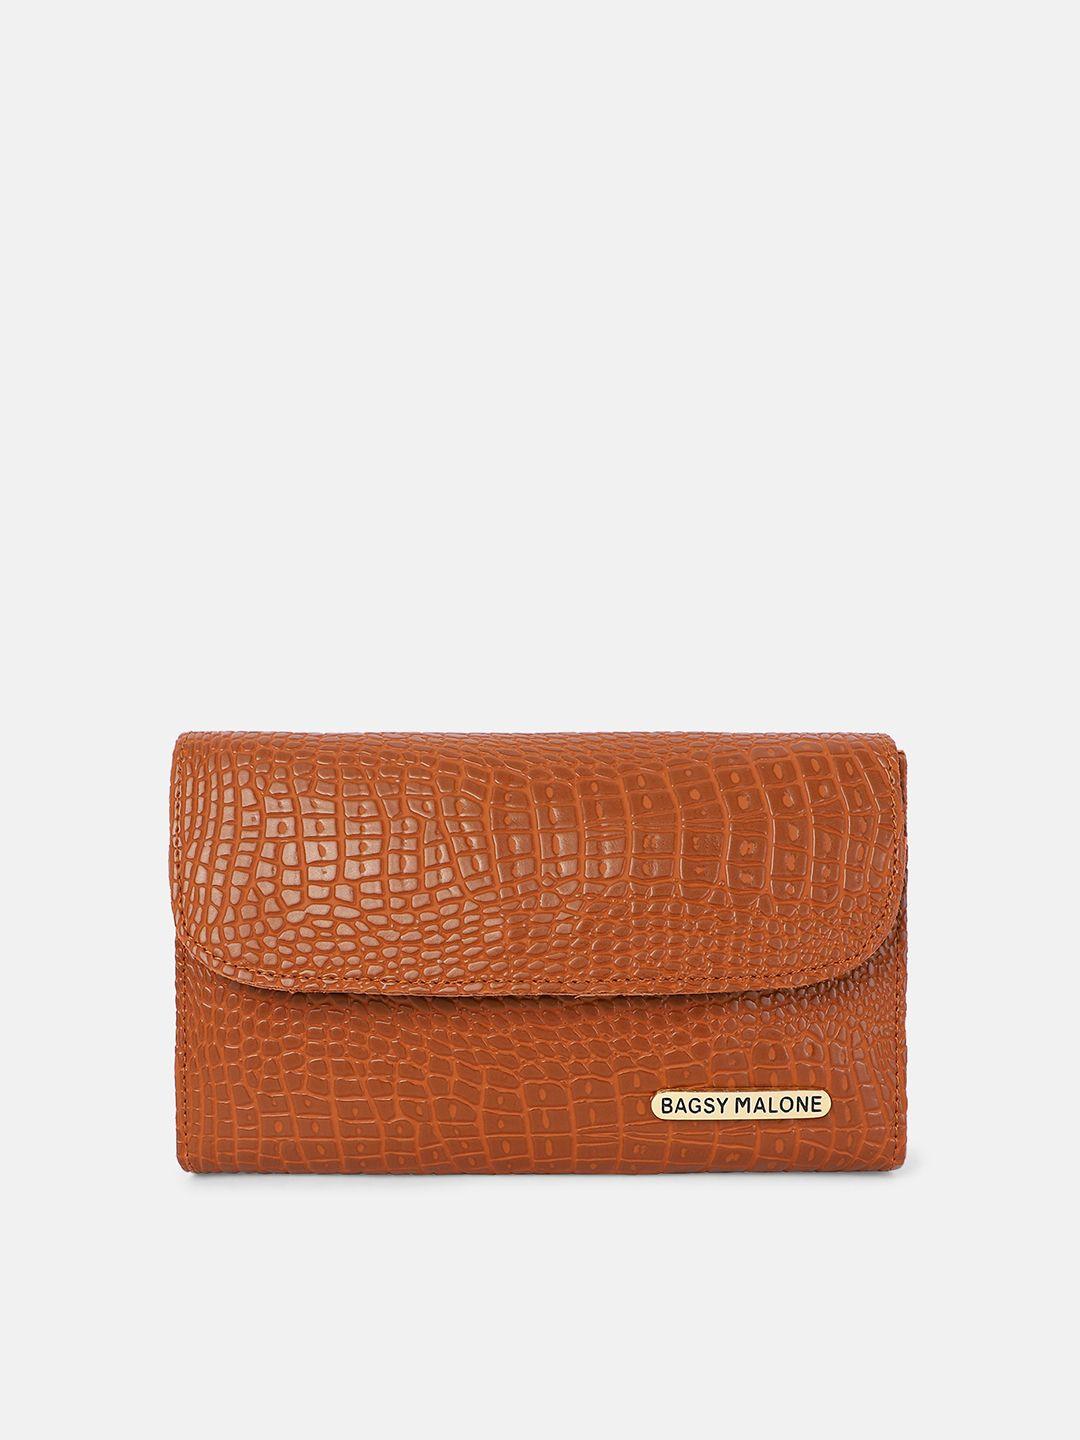 bagsy malone tan textured envelope clutch